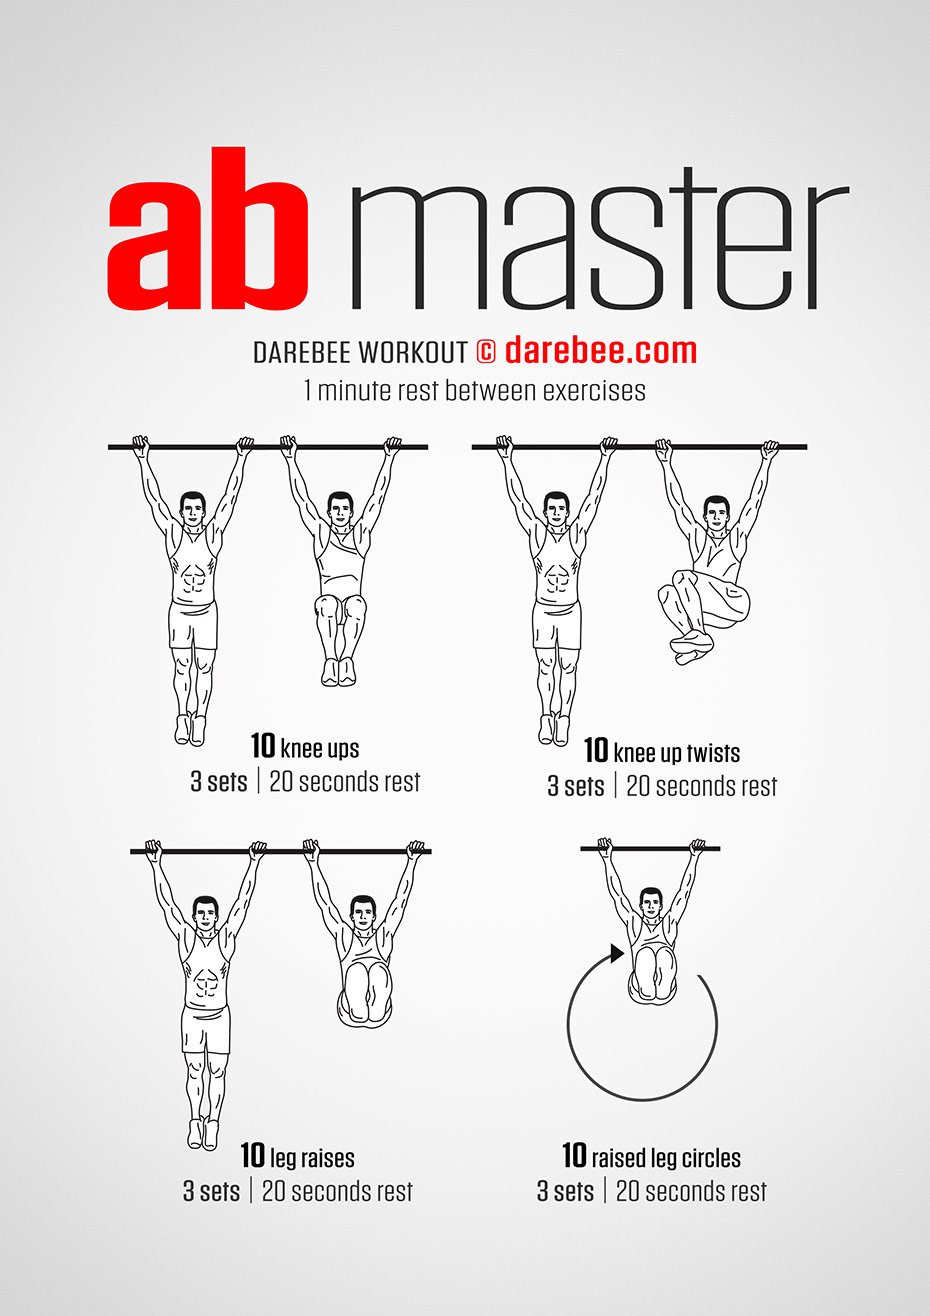 DAREBEE on X: Ab Master Workout by DAREBEE  #darebee  #abs #workout #workouts #fitness  / X